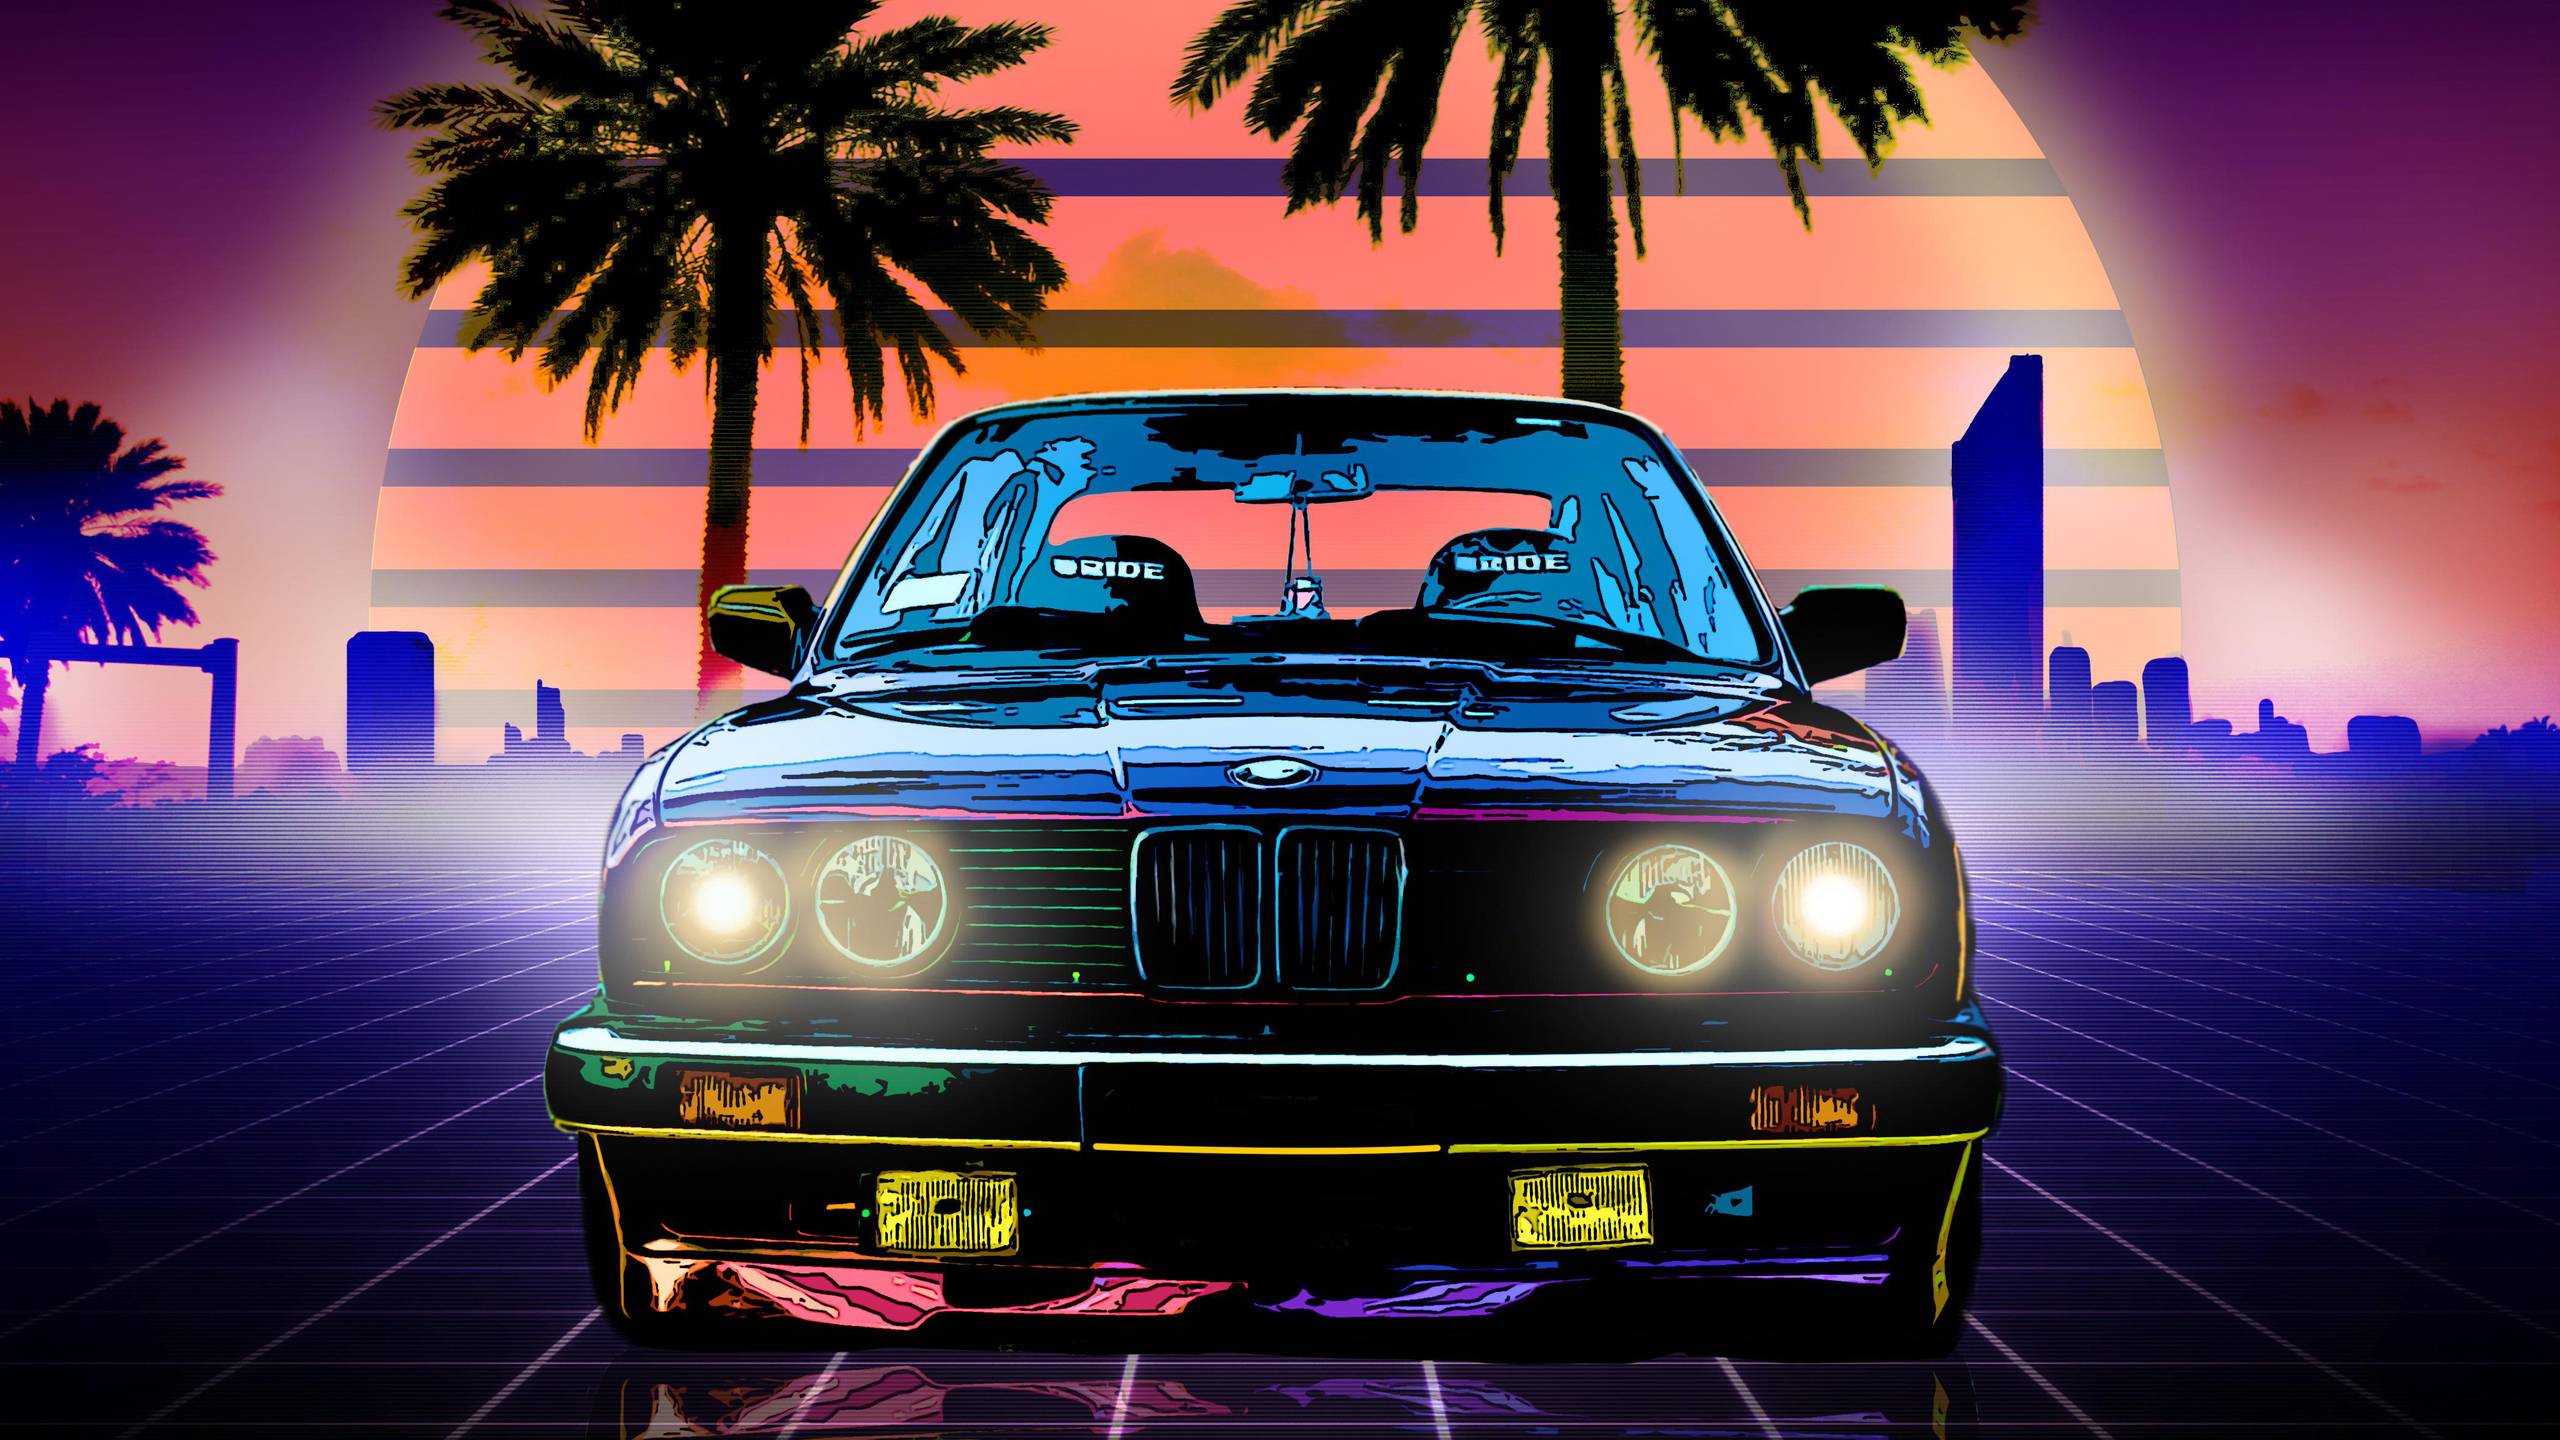 A car is parked in front of palm trees - BMW